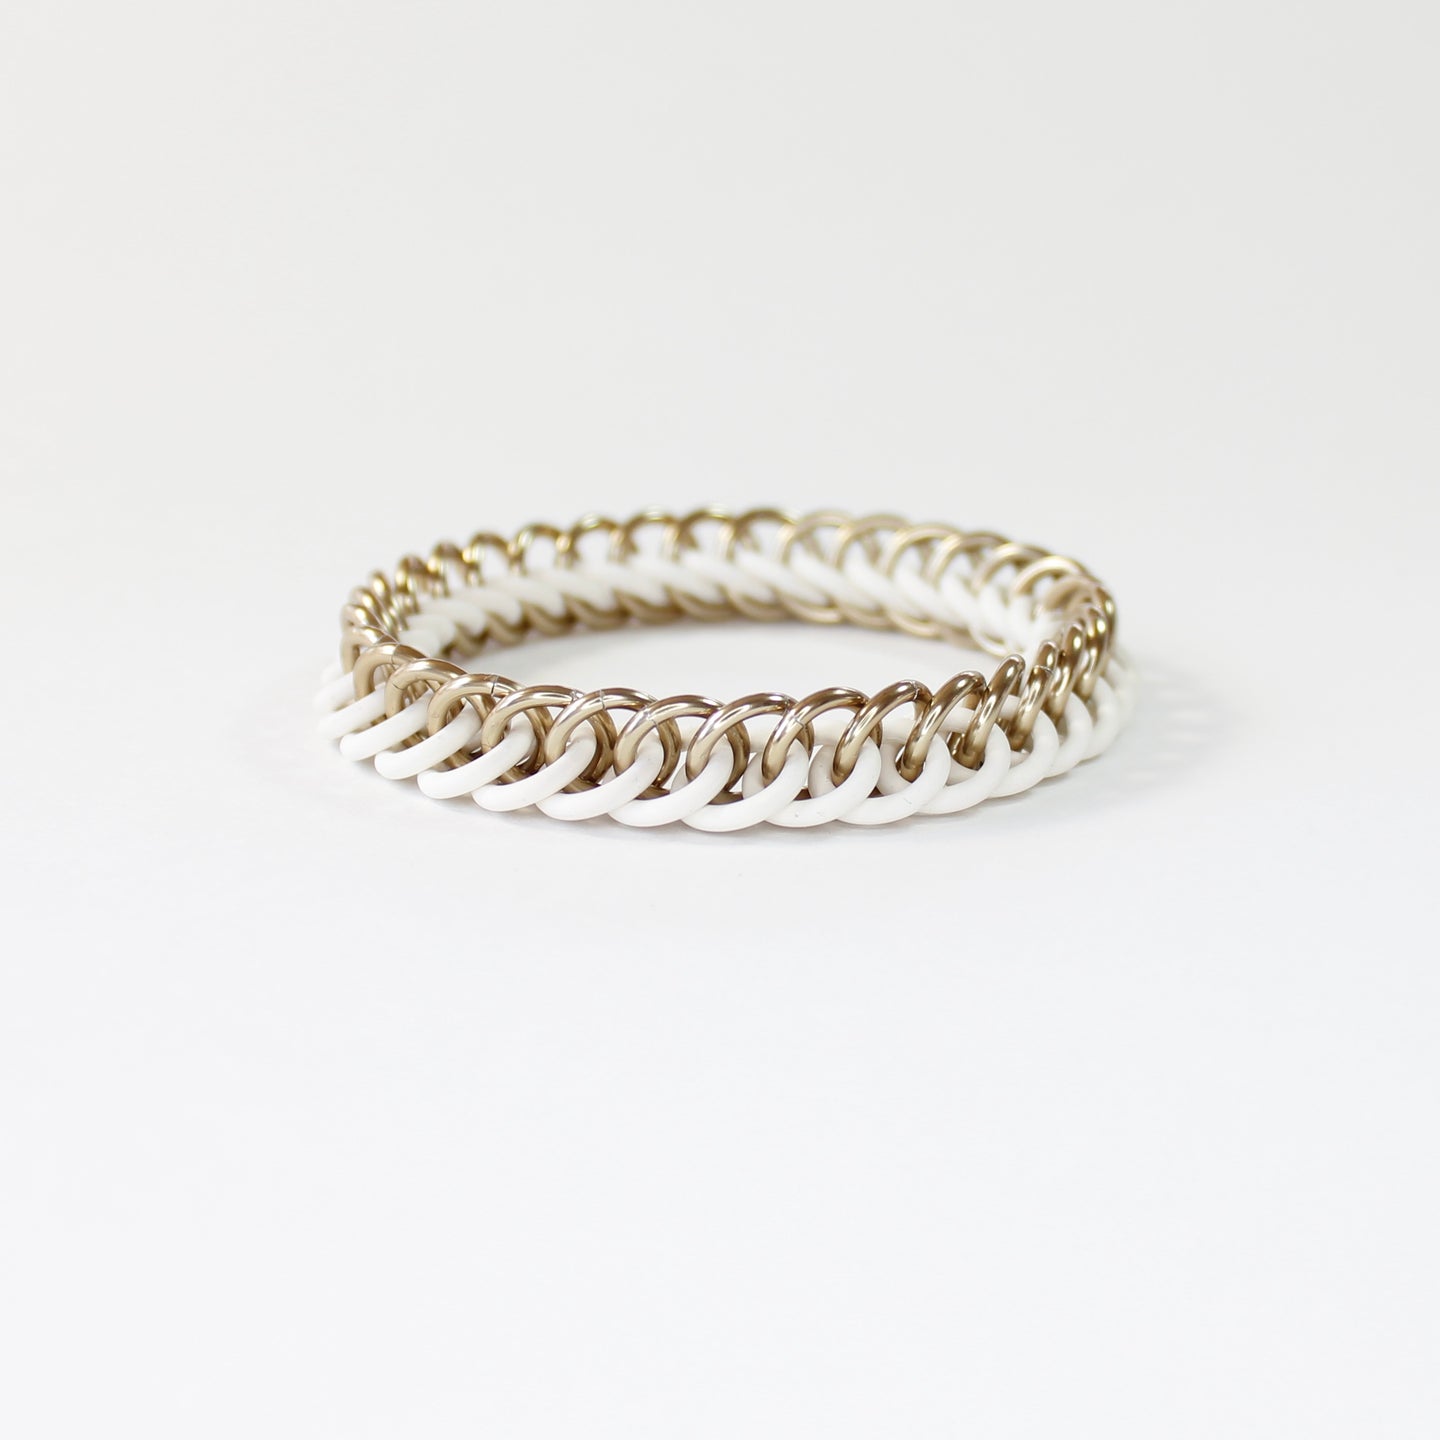 The Persian Stretch Bracelet in White + Champagne